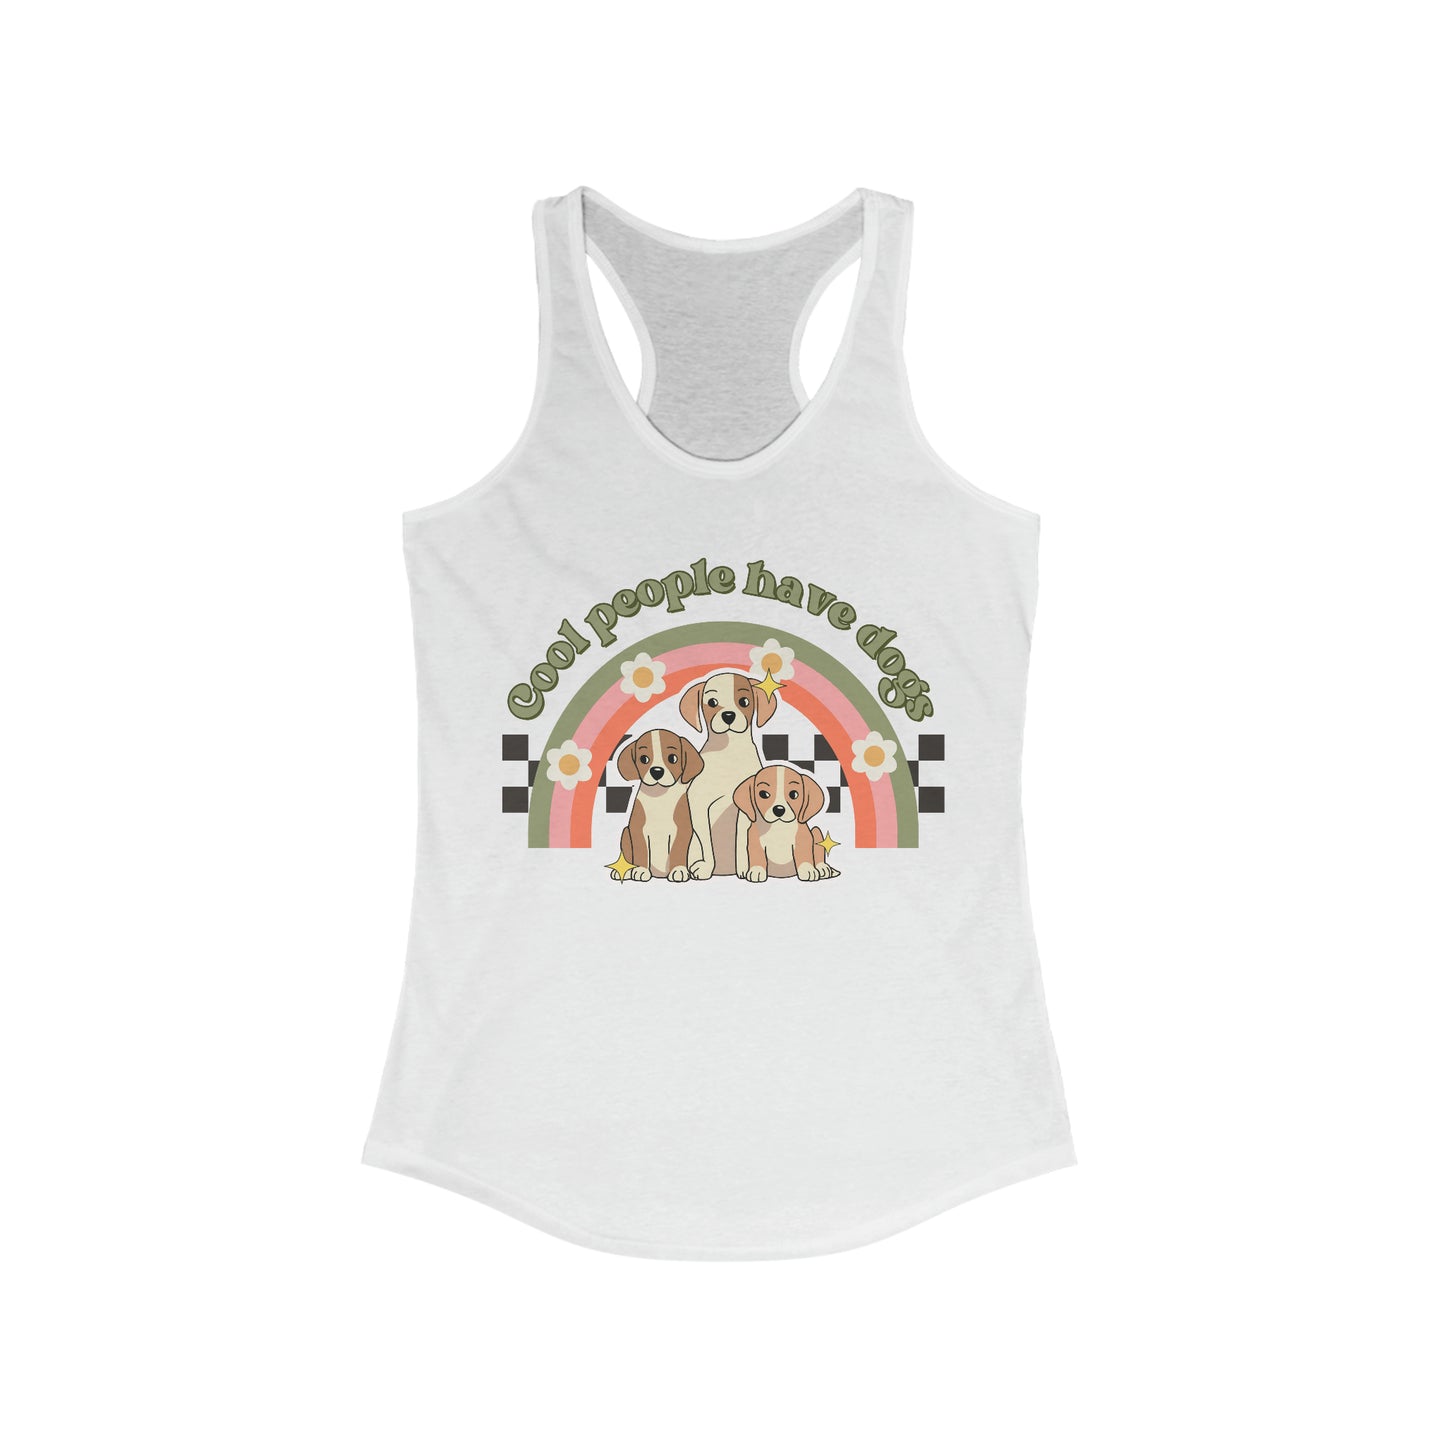 Cool People Have Dogs 1 - Women's Ideal Racerback Tank